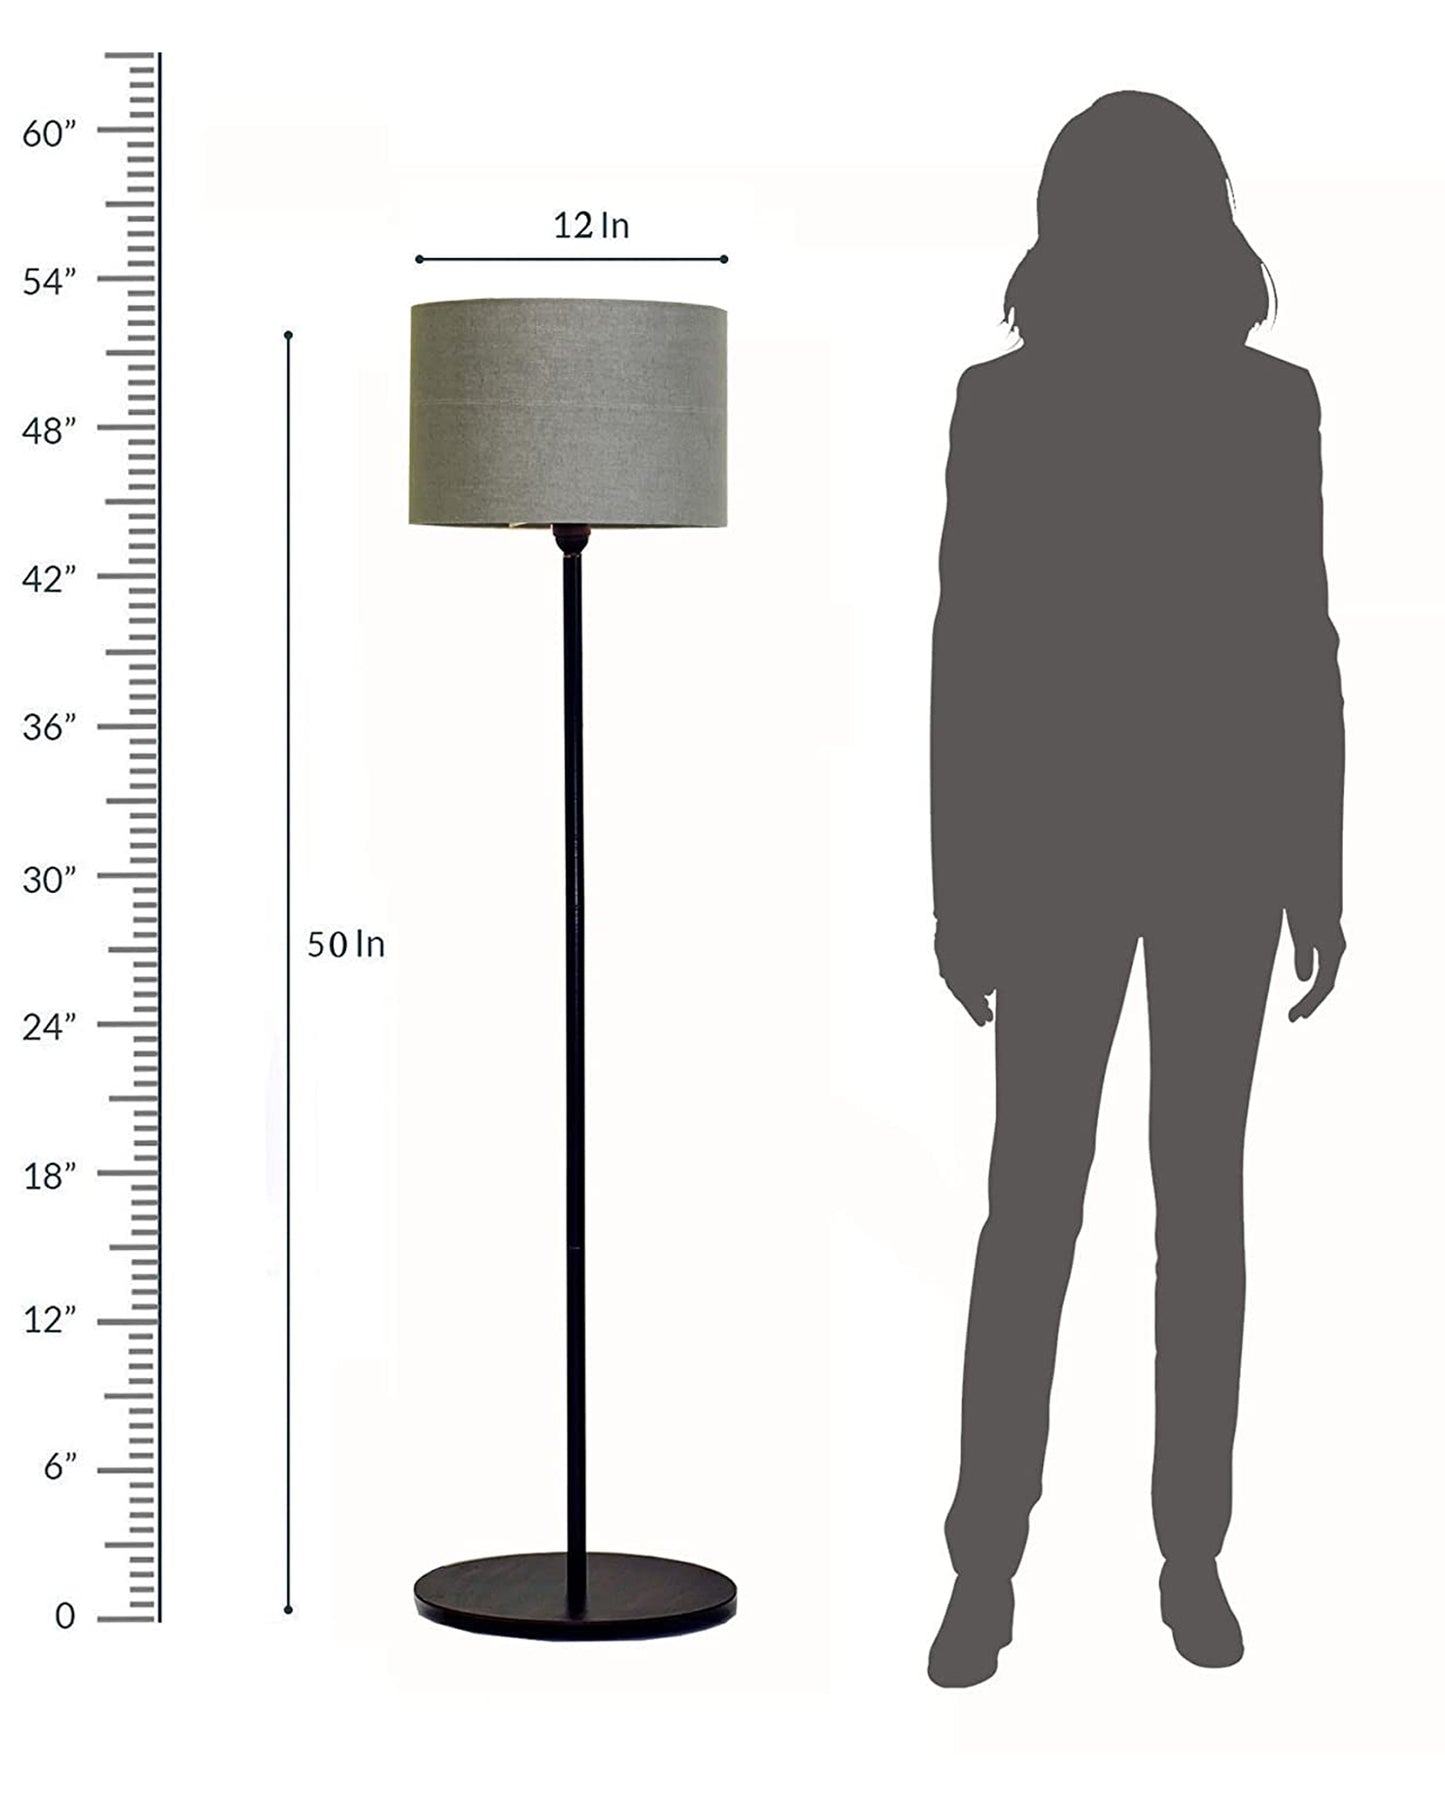 Floor Lamp with Wooden Base